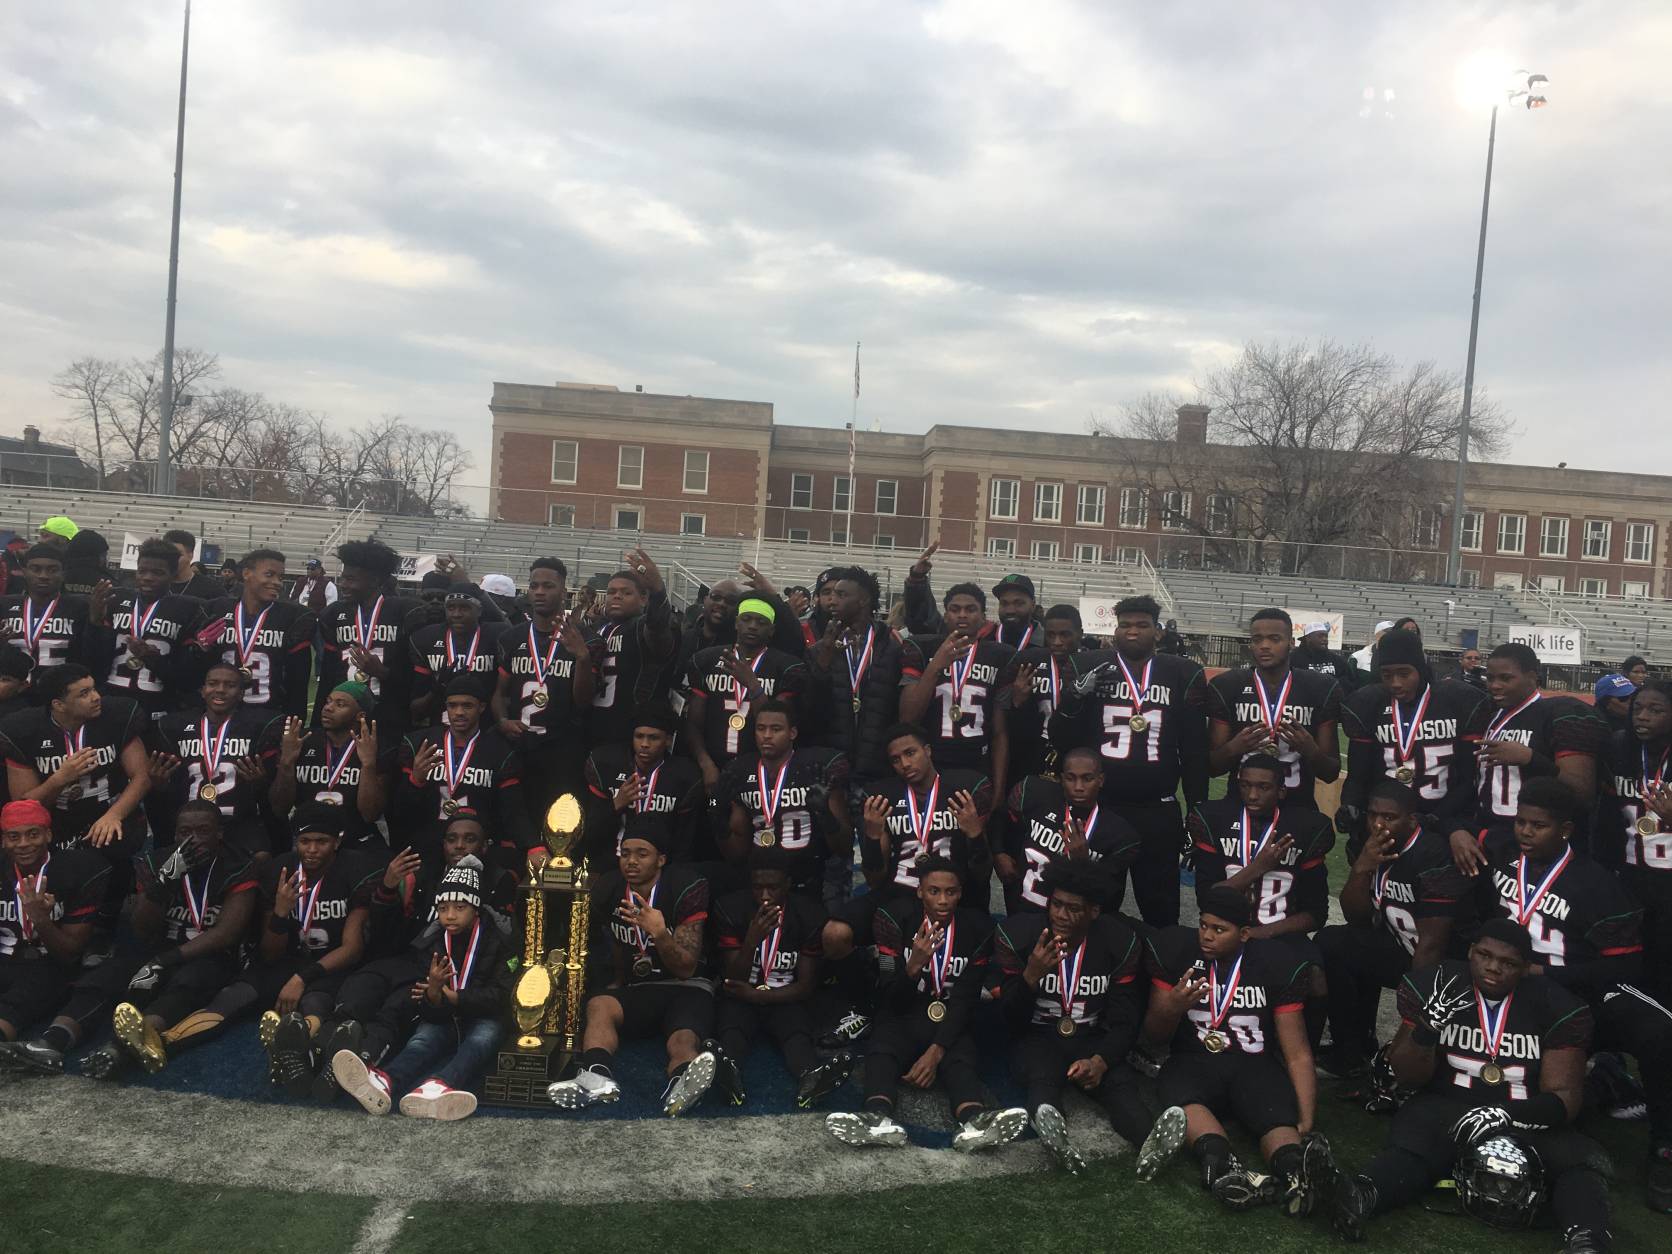 H.D. Woodson High School celebrates after winning the Turkey Bowl Thursday, Nov. 24, 2016. (WTOP/Mike Murillo)